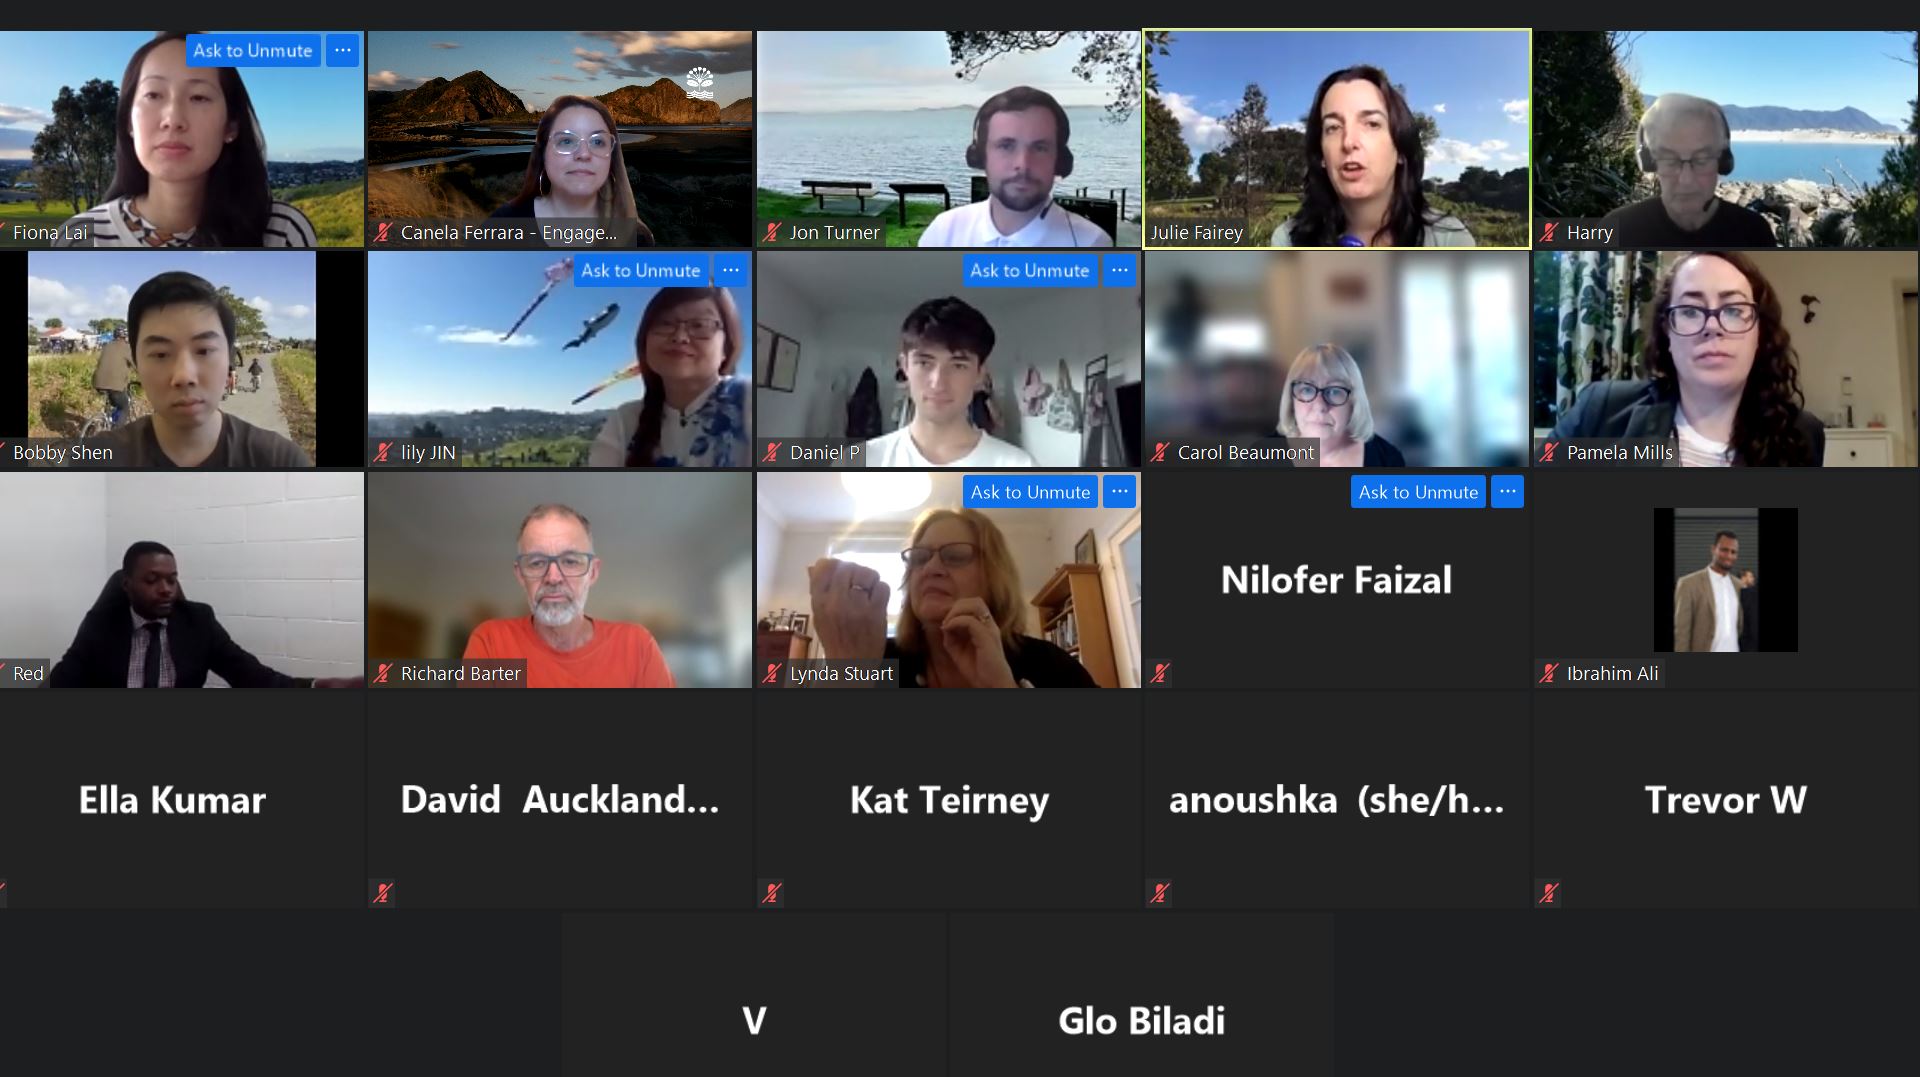 The monthly community forum hosted by the Puketāpapa Local Board was convened online during the COVID-19 pandemic. This went a long way in maintaining community connections and continuity.